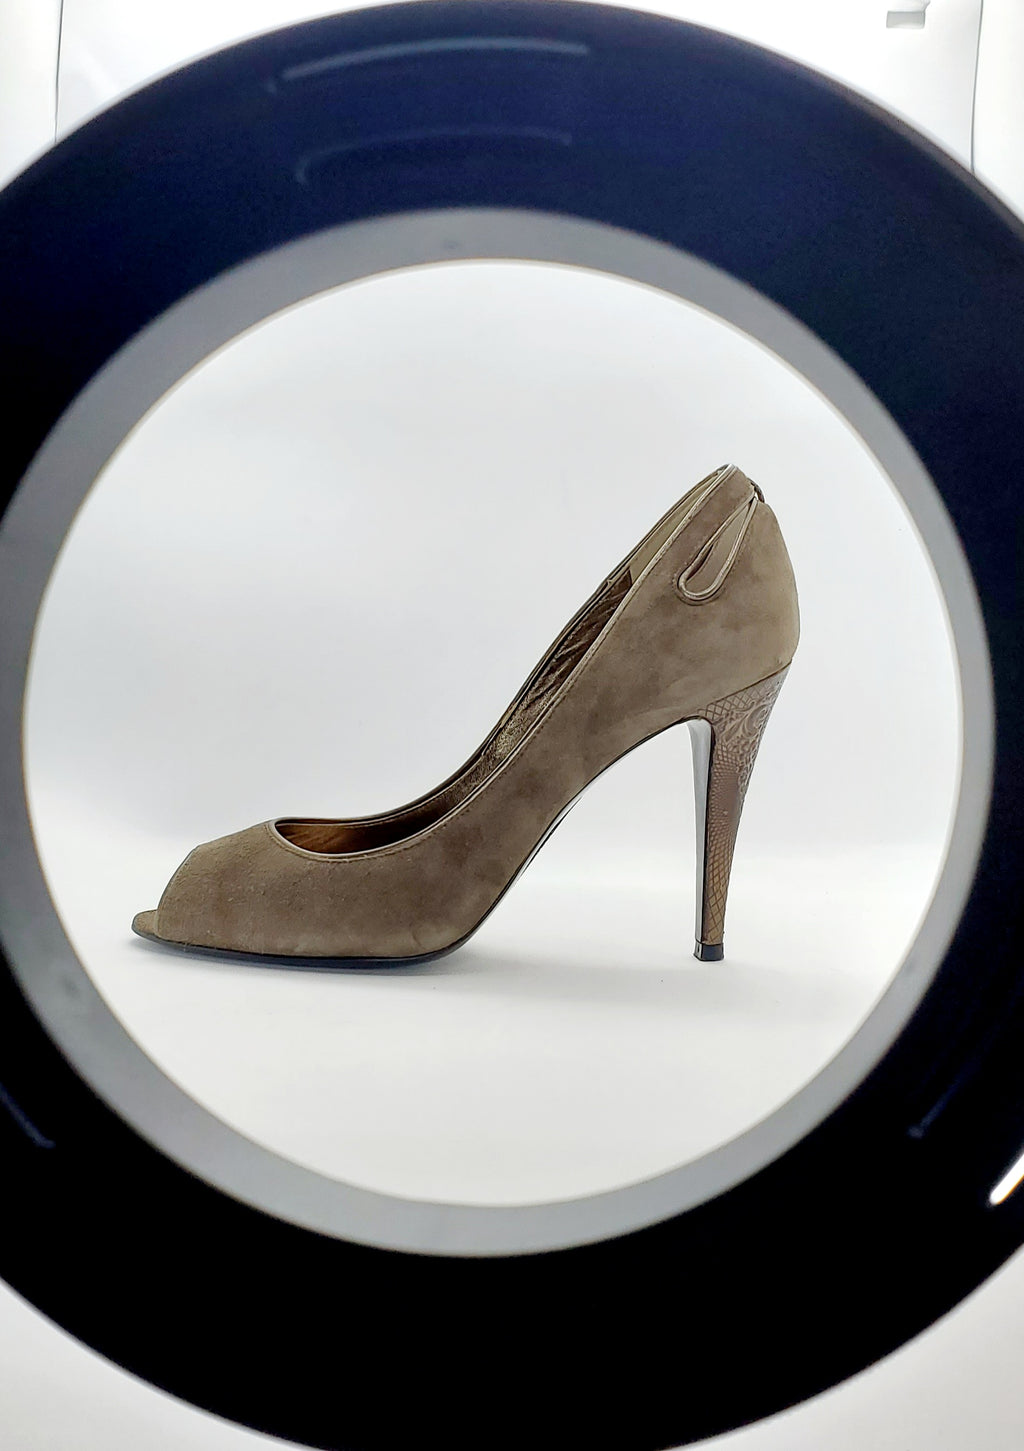 Keyhole view of Elie Tahari Suede open toe pump with ornate patterned keyhole heels